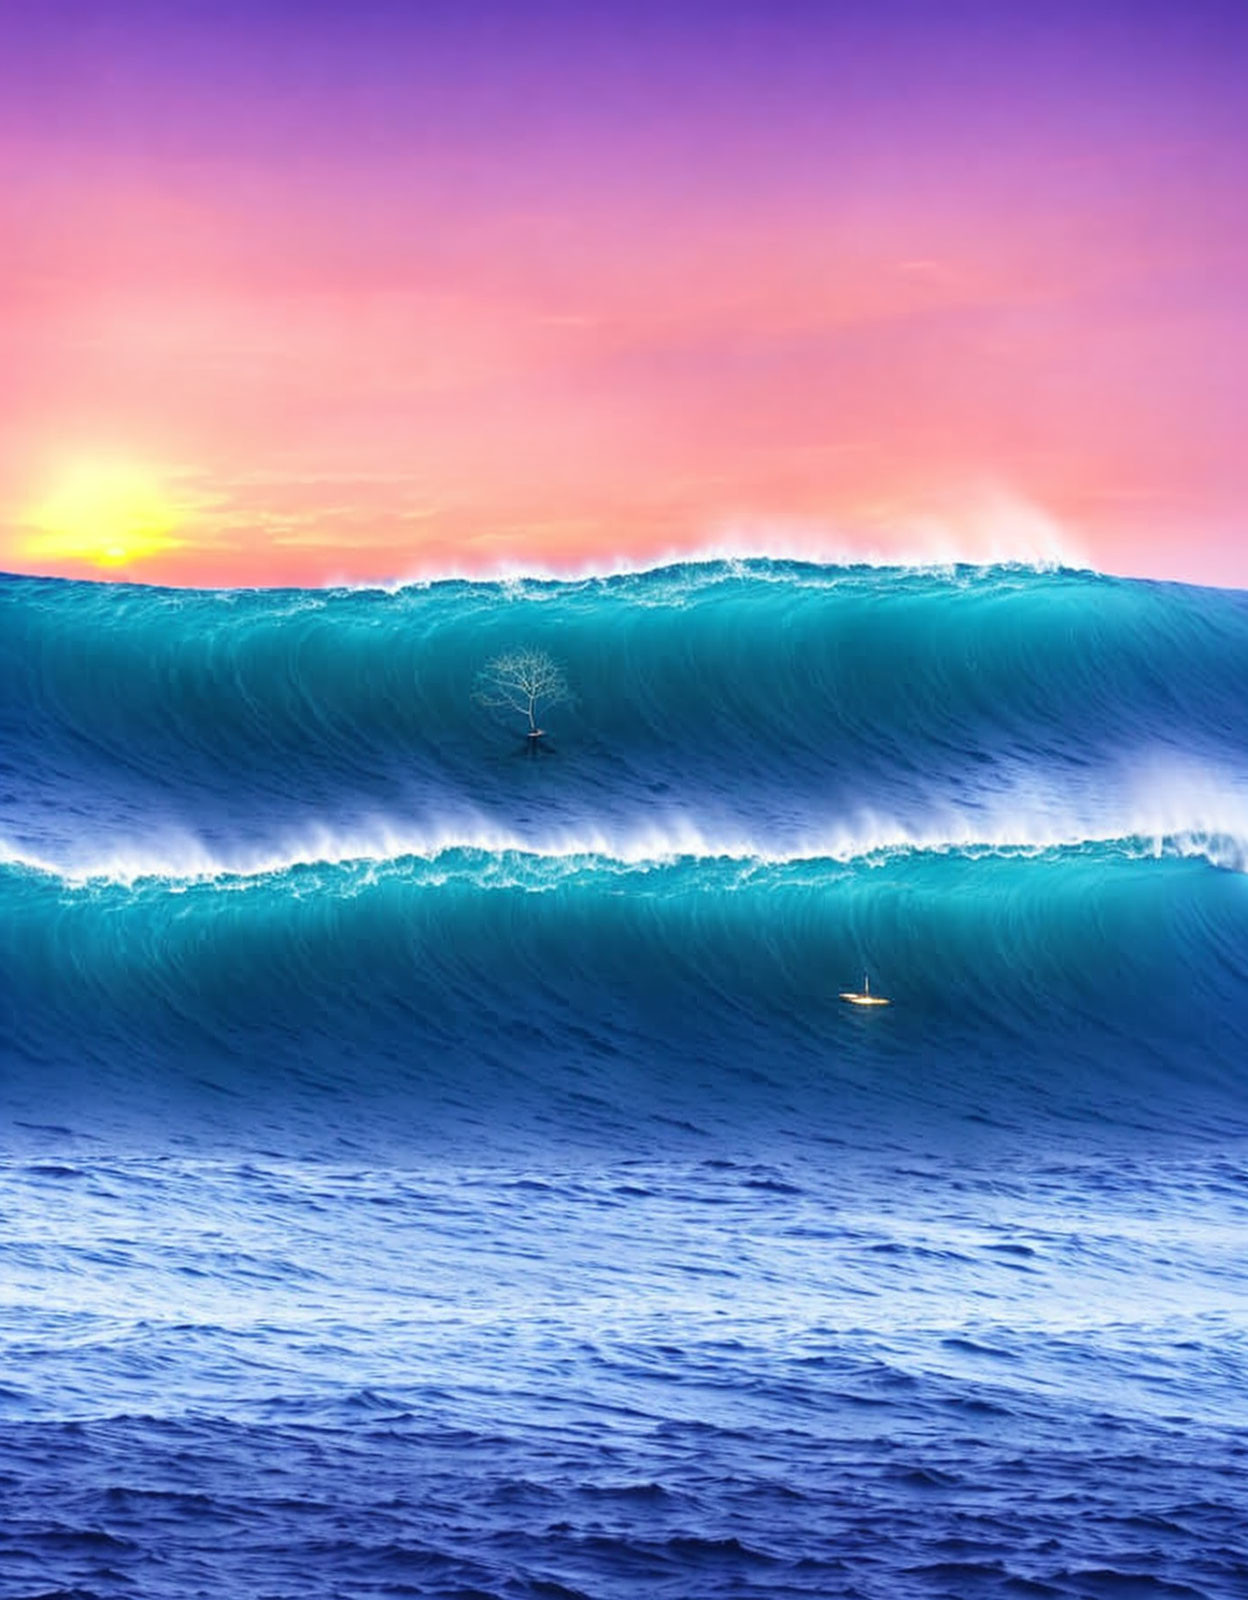 Colorful sunset backdrop to large ocean wave at dusk